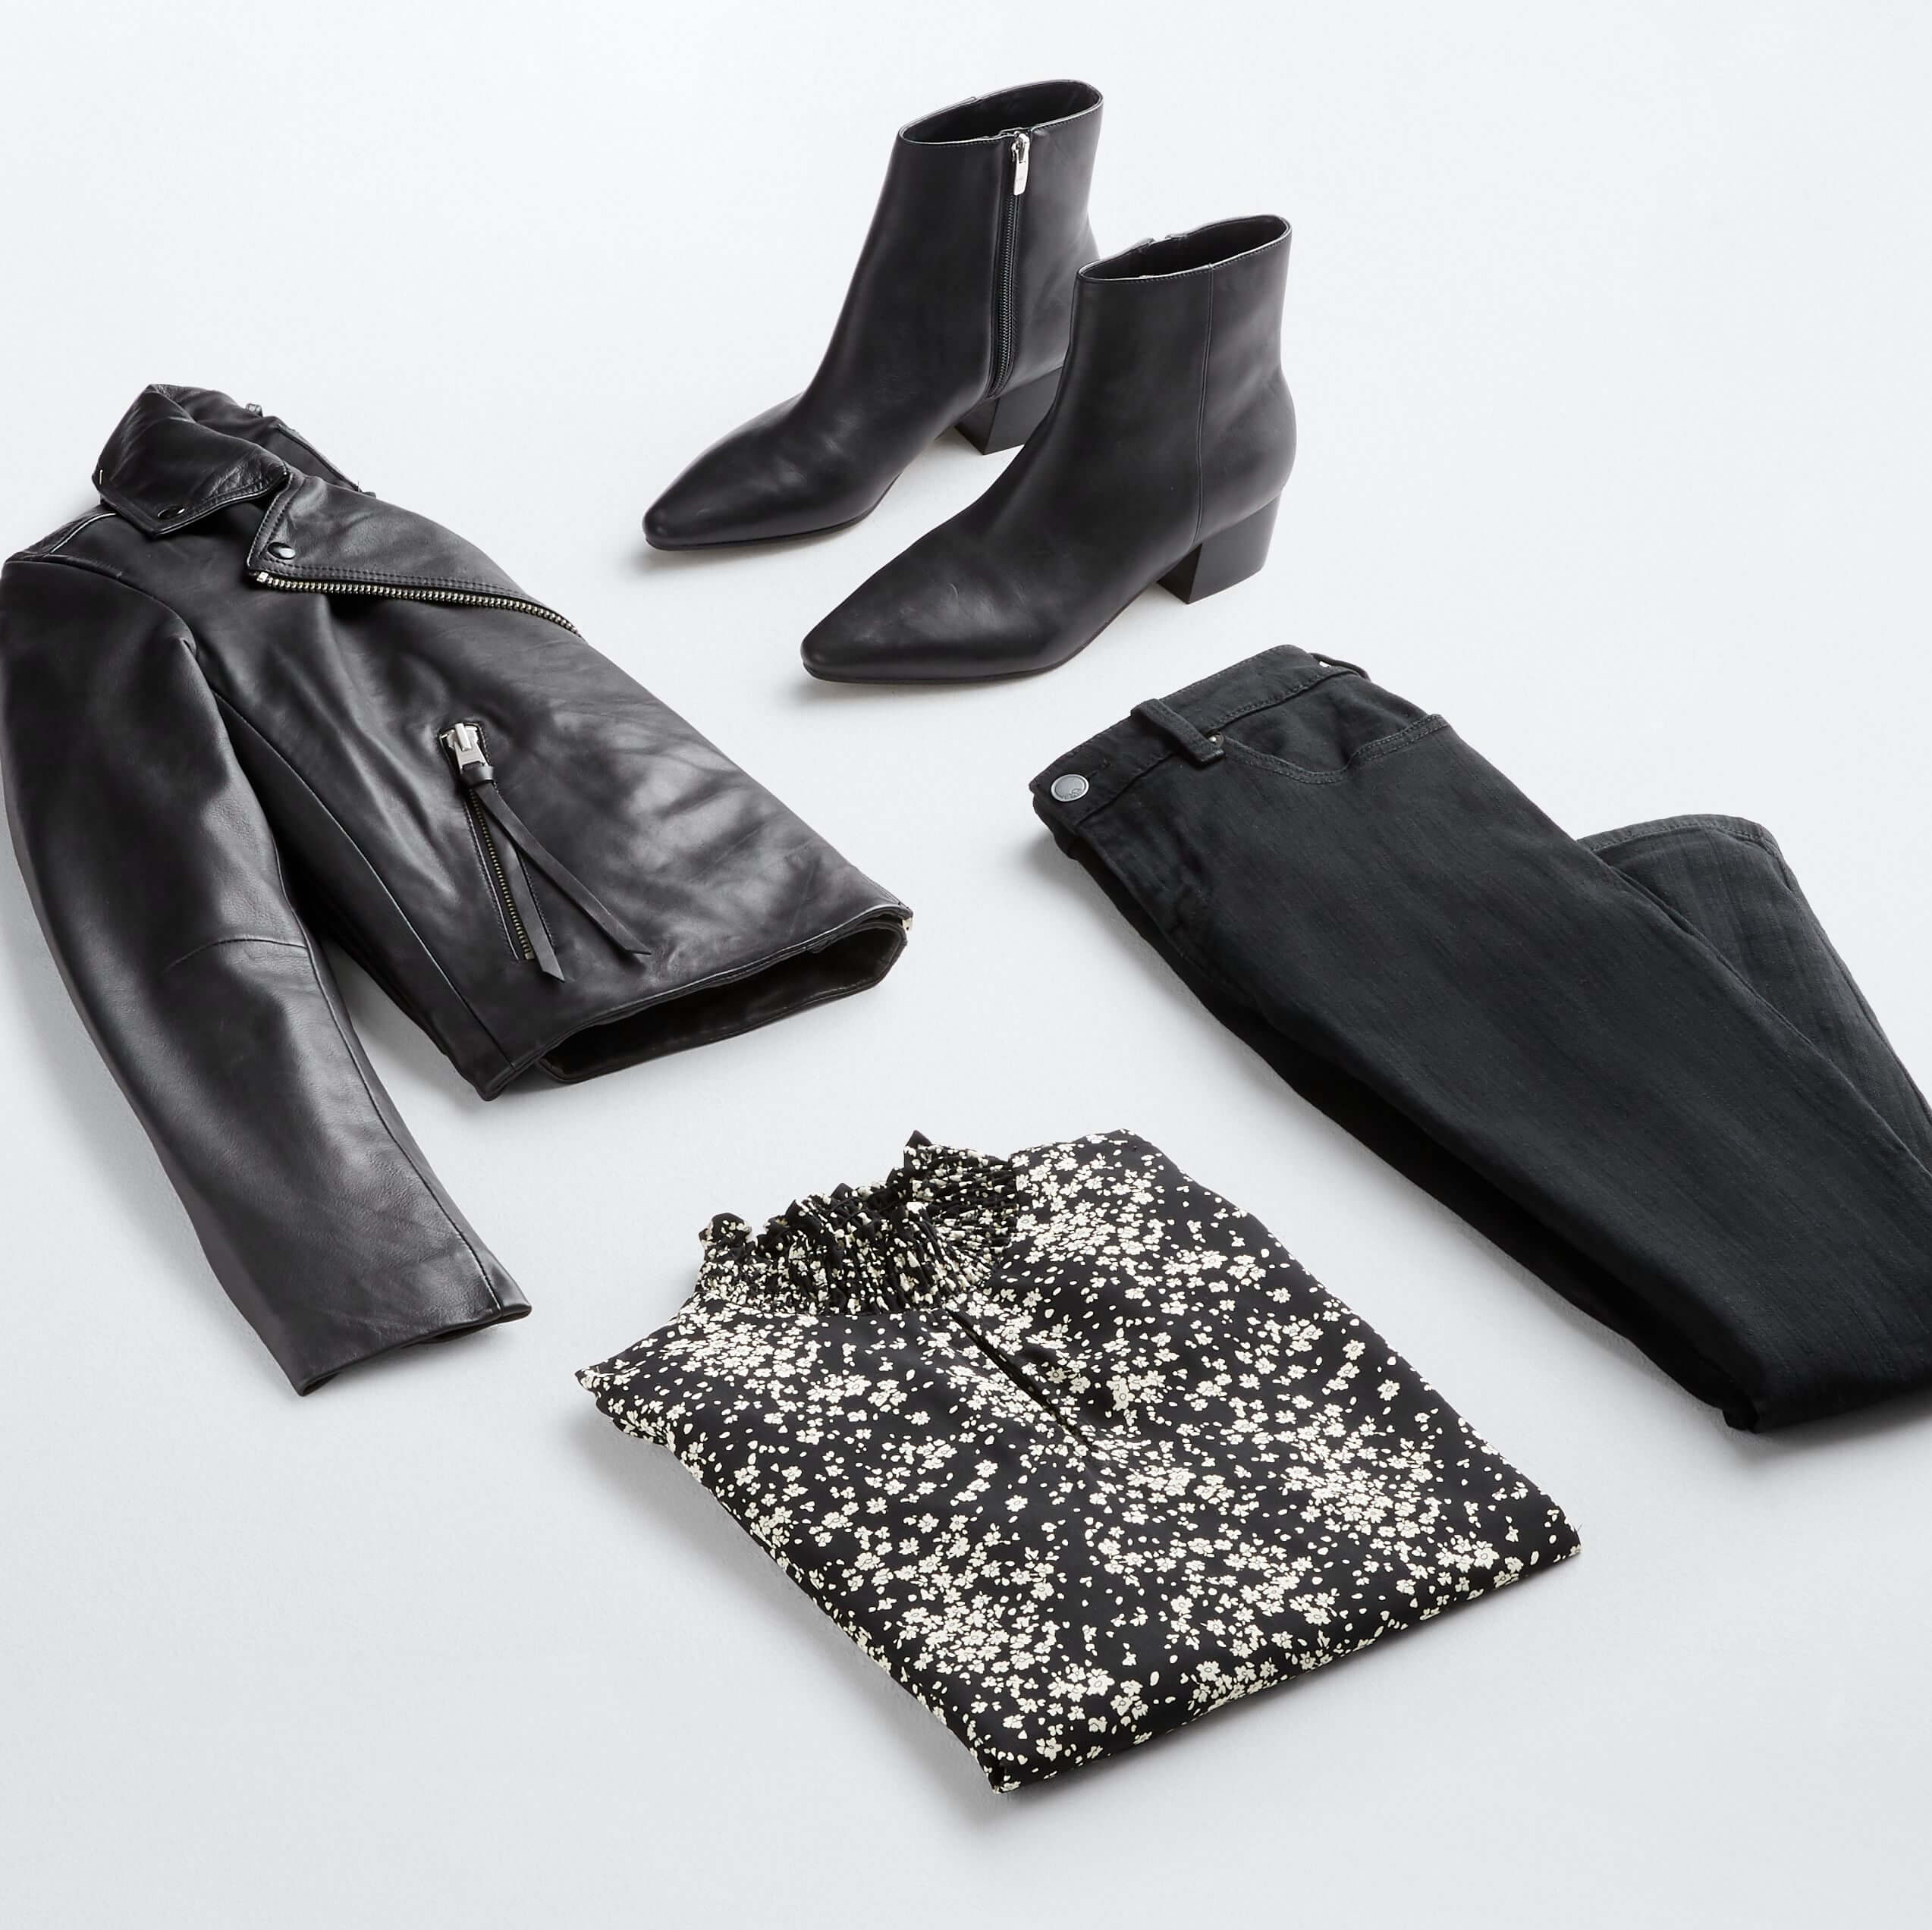 Stitch Fix Women's outfit laydown featuring a black leather jacket, black booties, black jeans and a black mock-neck printed top.